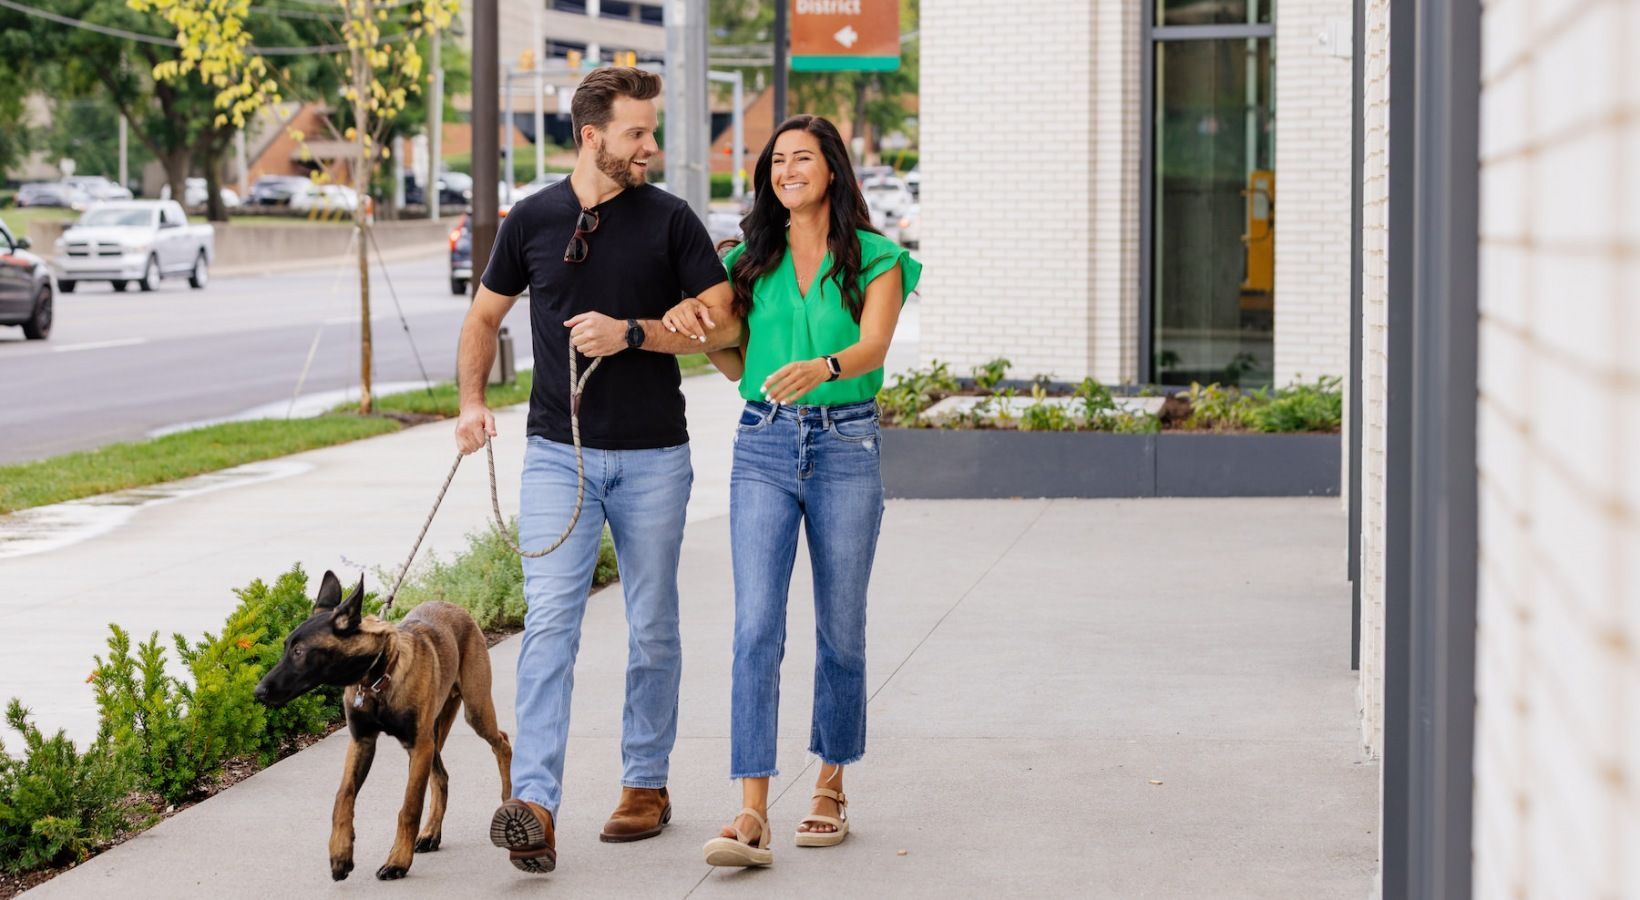 A man and a woman are walking a dog on a leash on a sidewalk.